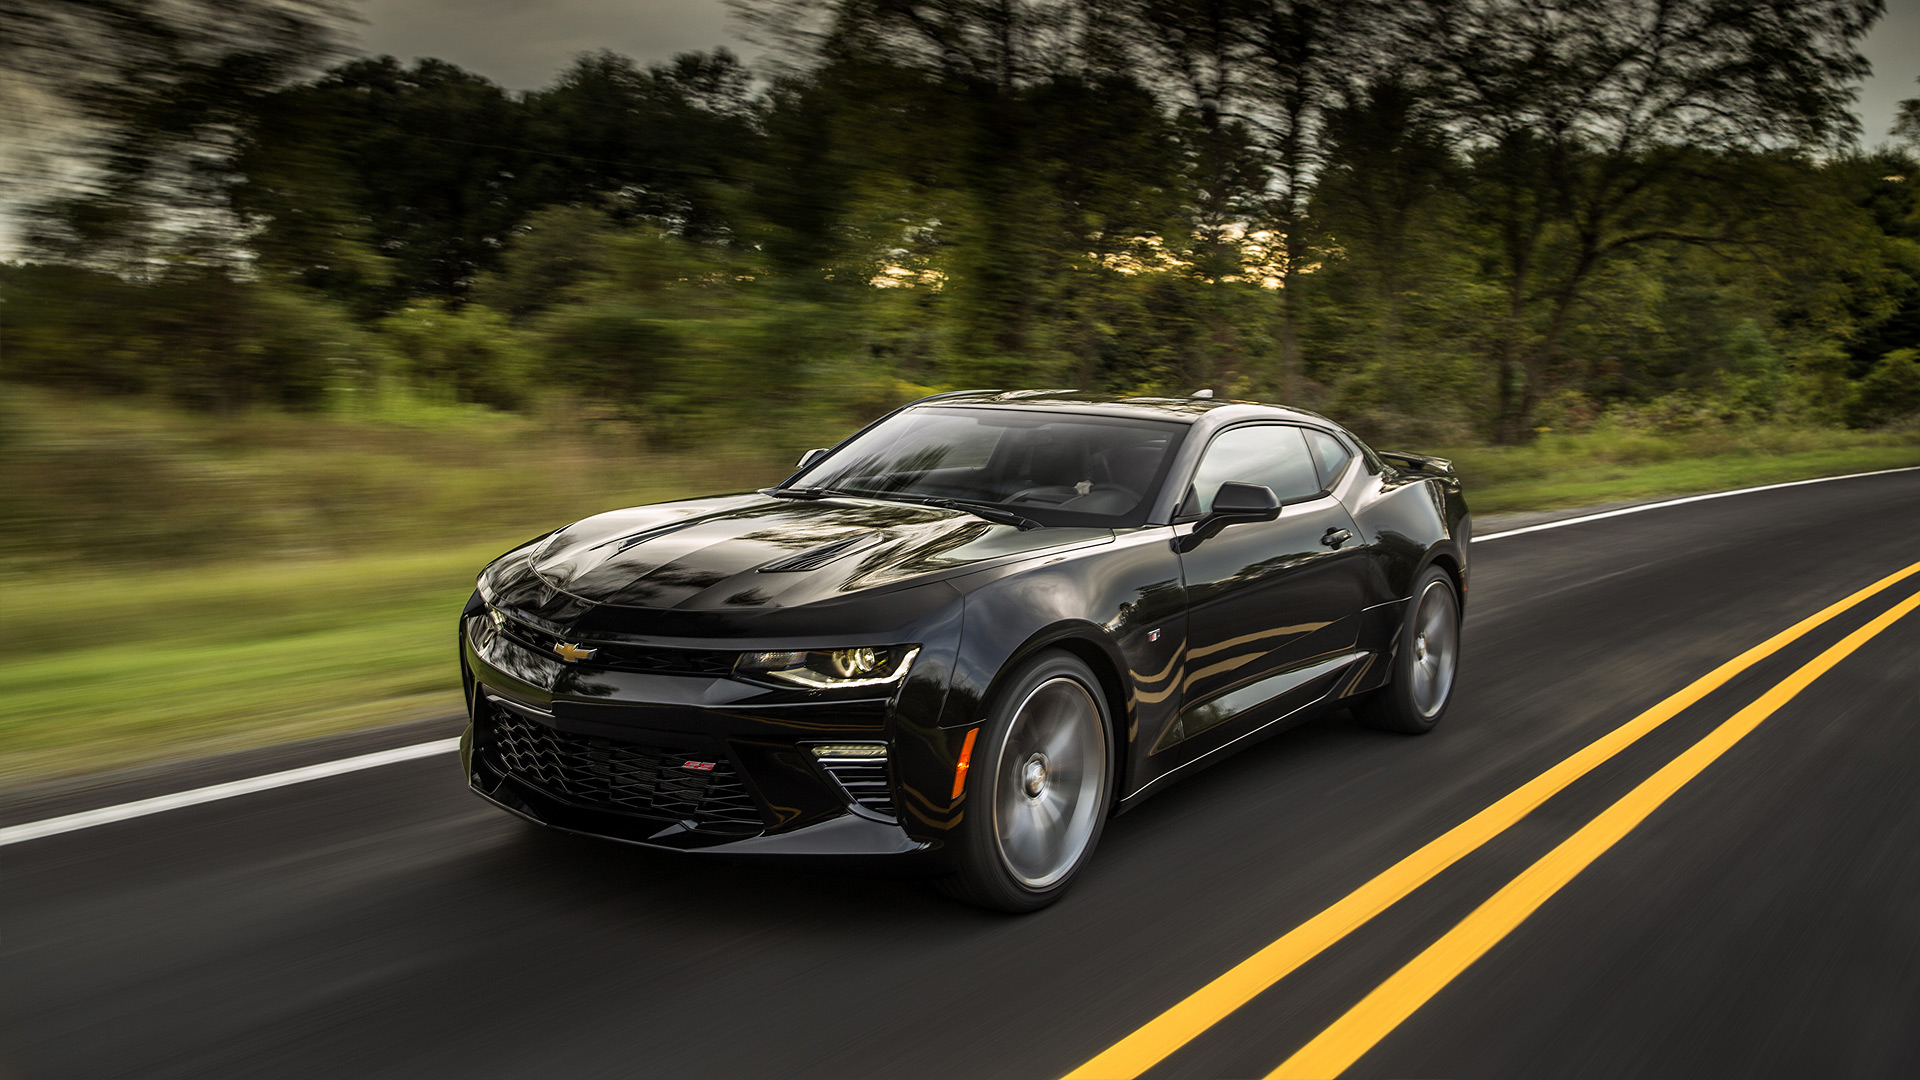 2016 Chevrolet Camaro SS Wallpapers HD Images   WSupercars